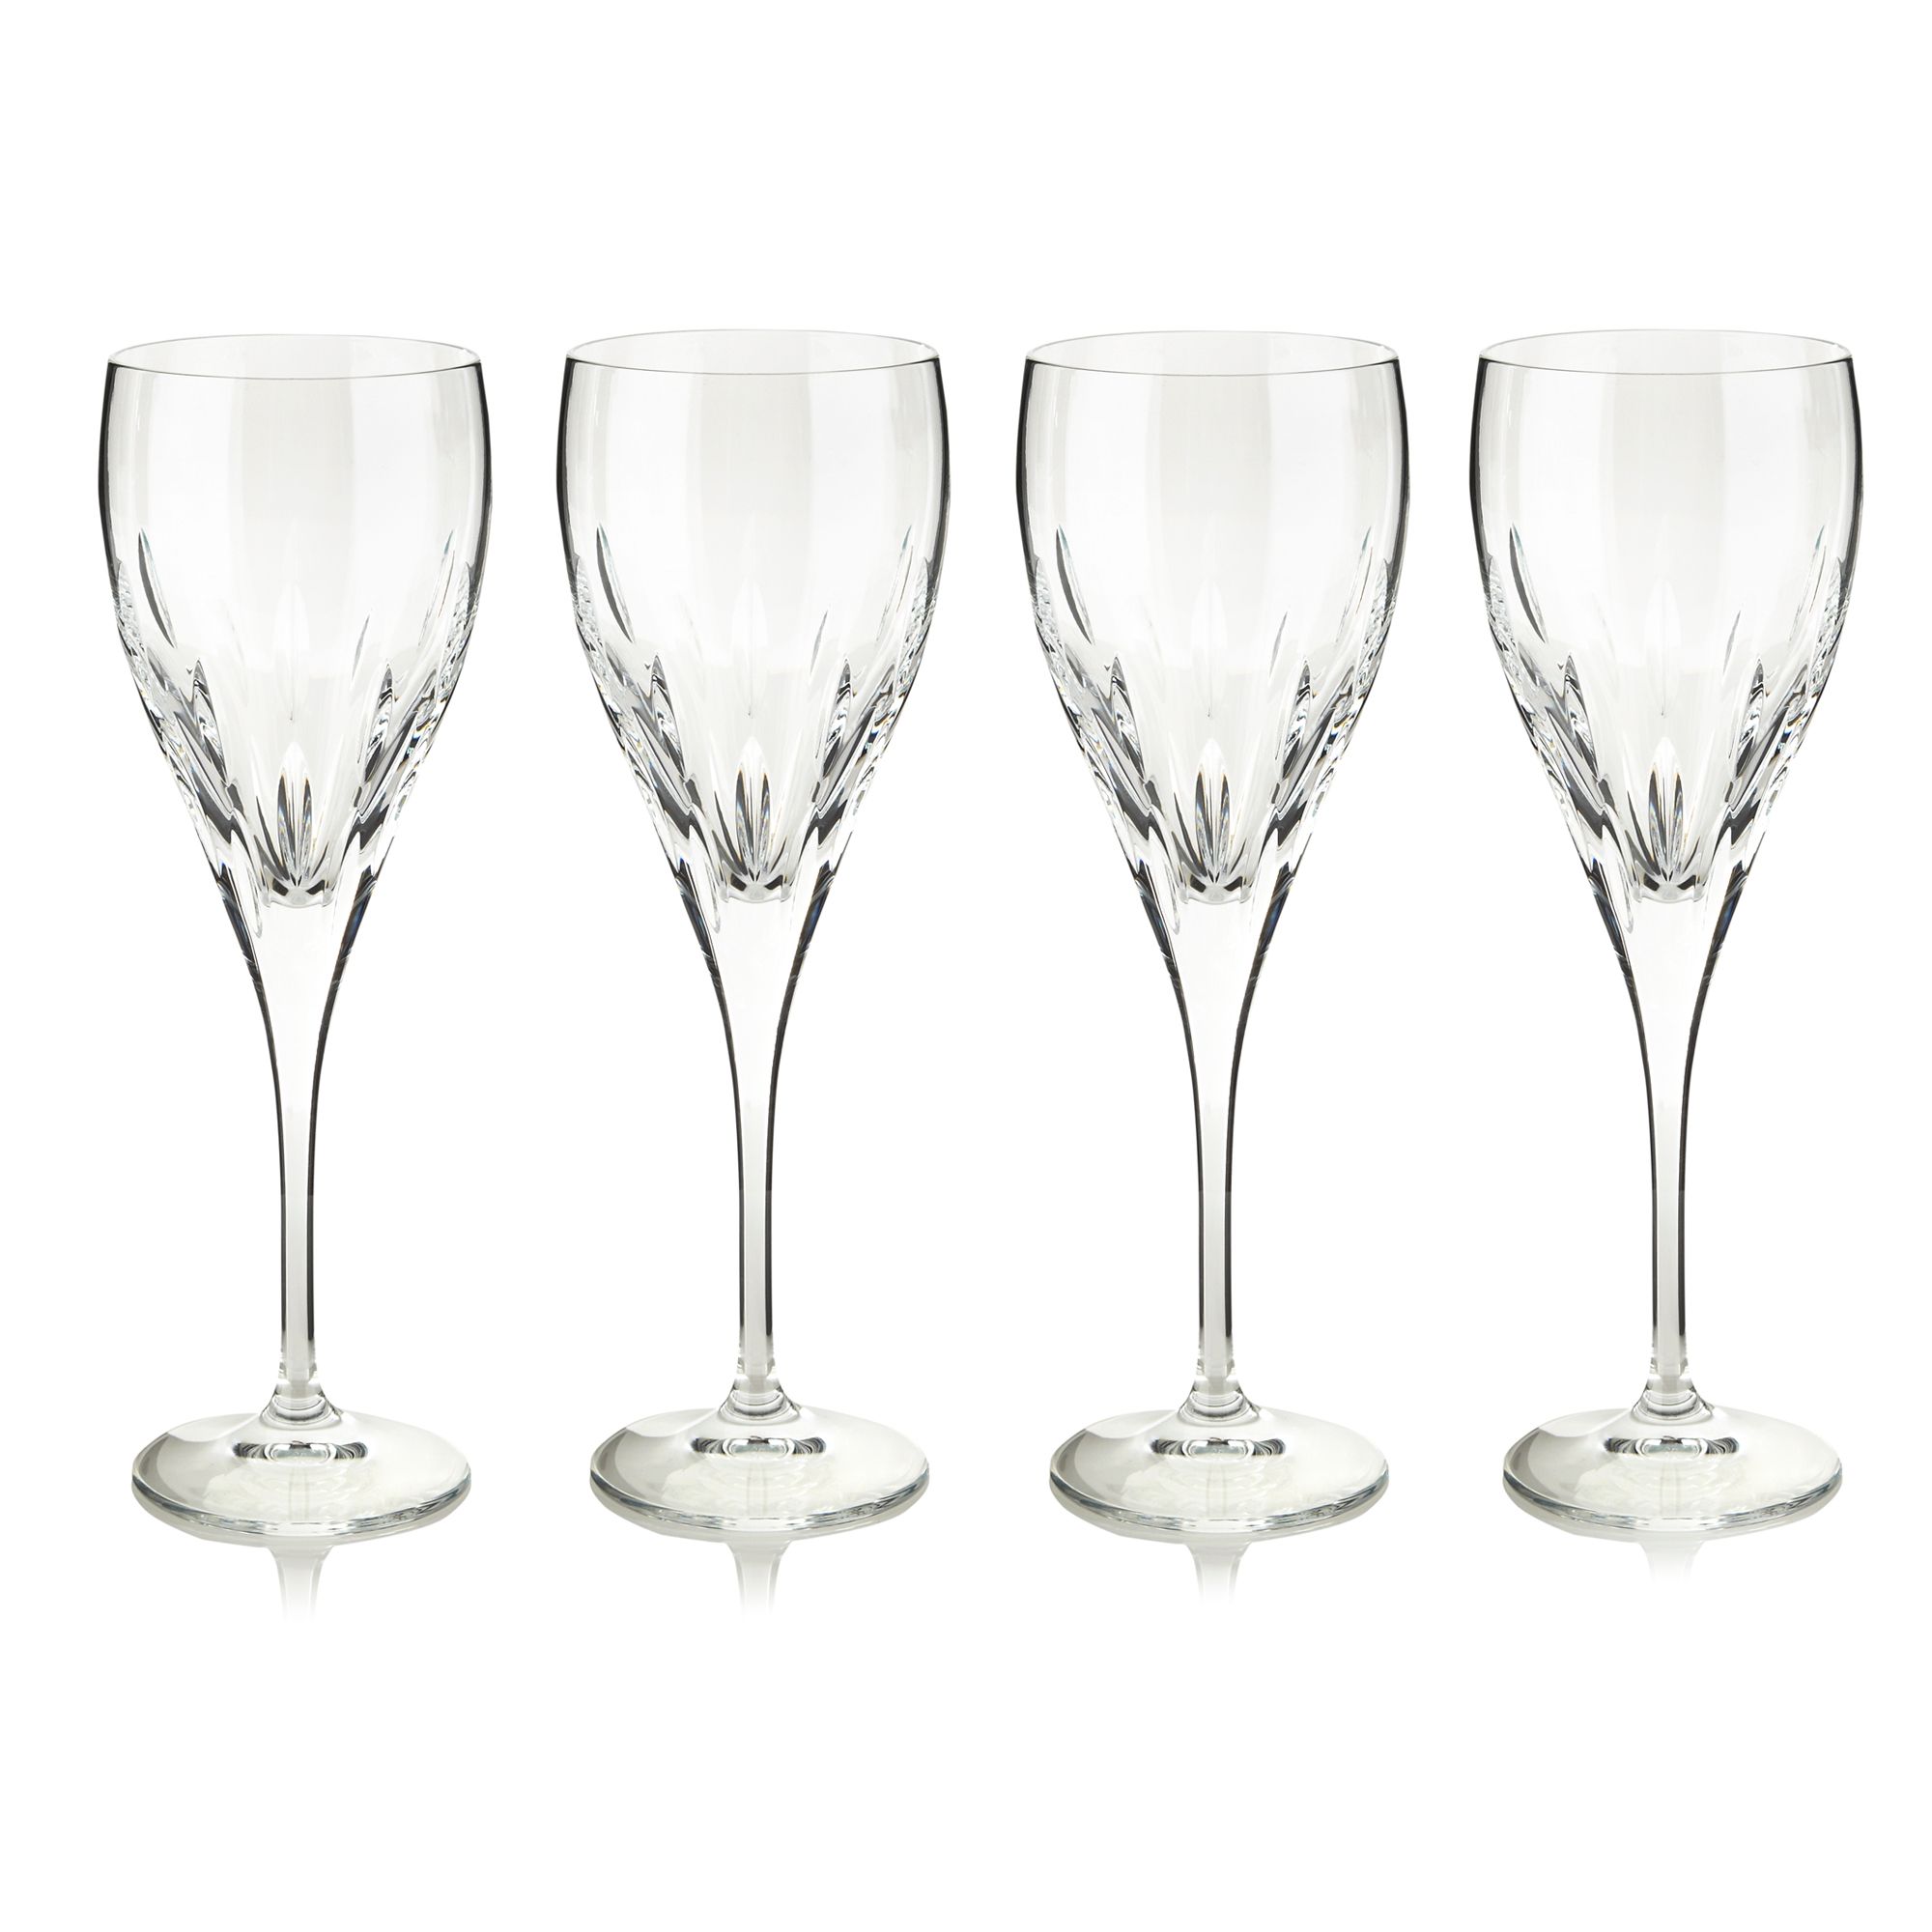 Details about Debenhams Set Of Four 24% Lead Crystal 'Amelia' Small ...